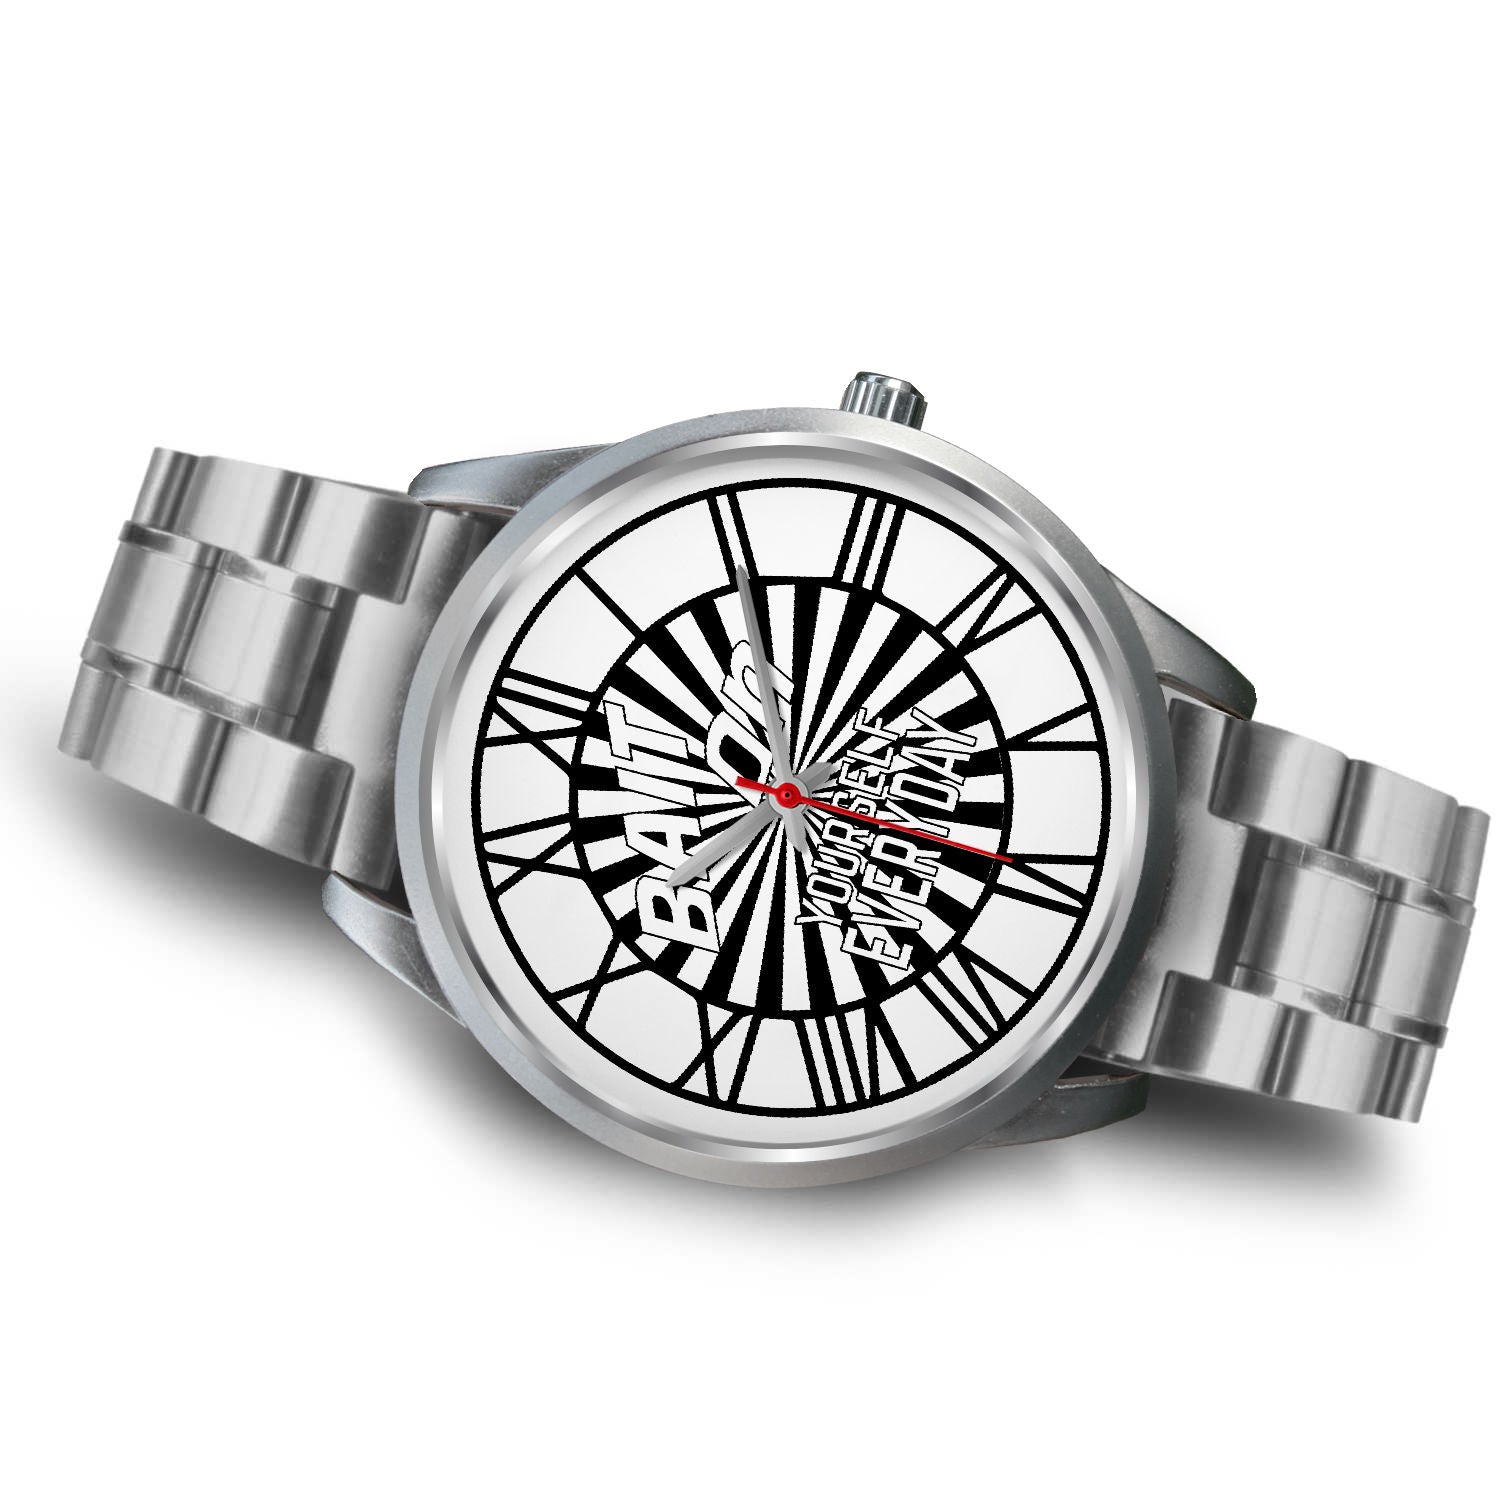 Bait on Yourself Everyday Graphic Unisex Silver Watch with Band Color Options-Silver Watch-Digital Rawness